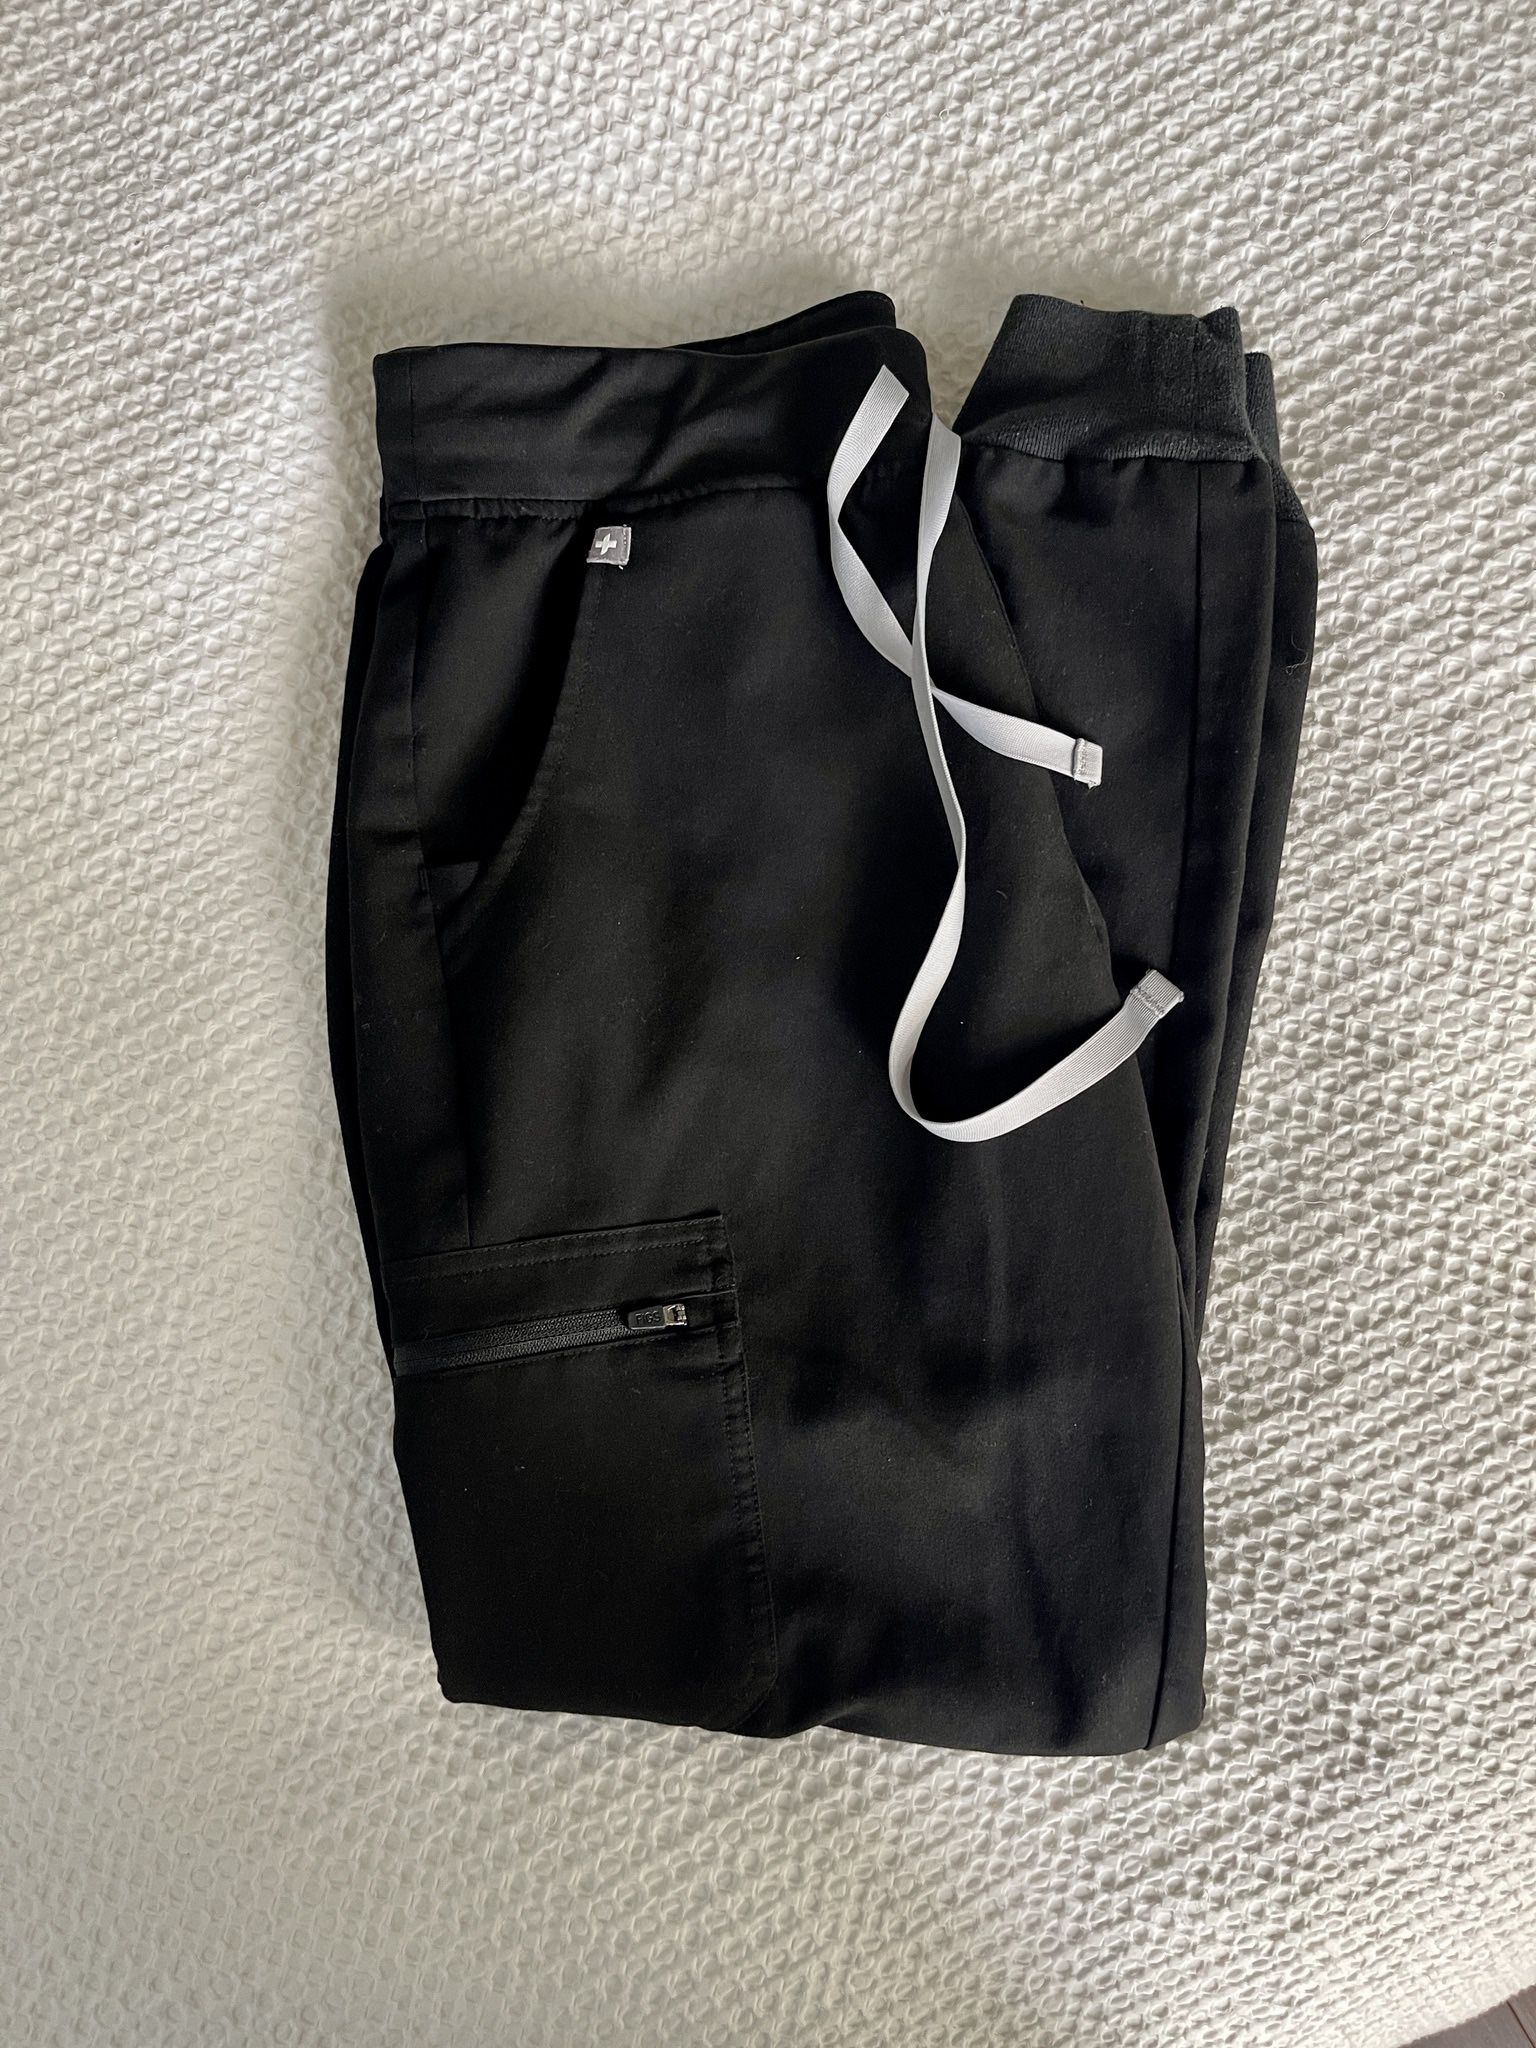 FIGS Technical Collection Black Jogger Style Scrub Pants, Size Small 